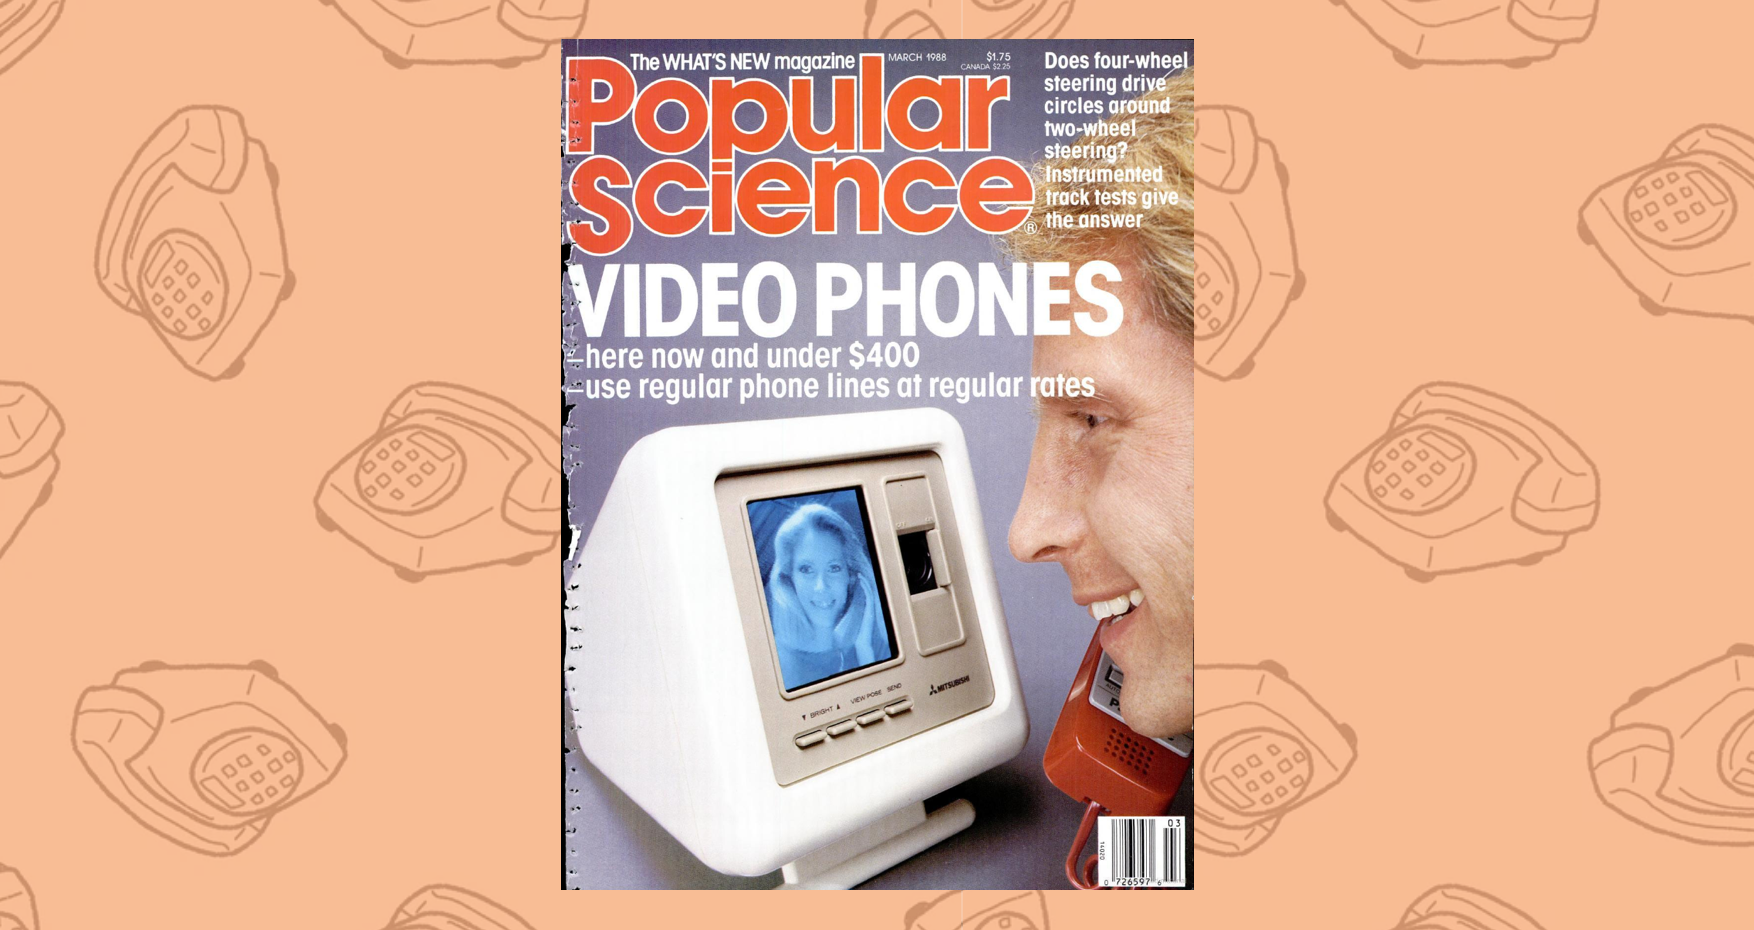 Move on, FaceTime: We're calling on a 1987 Mitsubishi VisiTel video phone